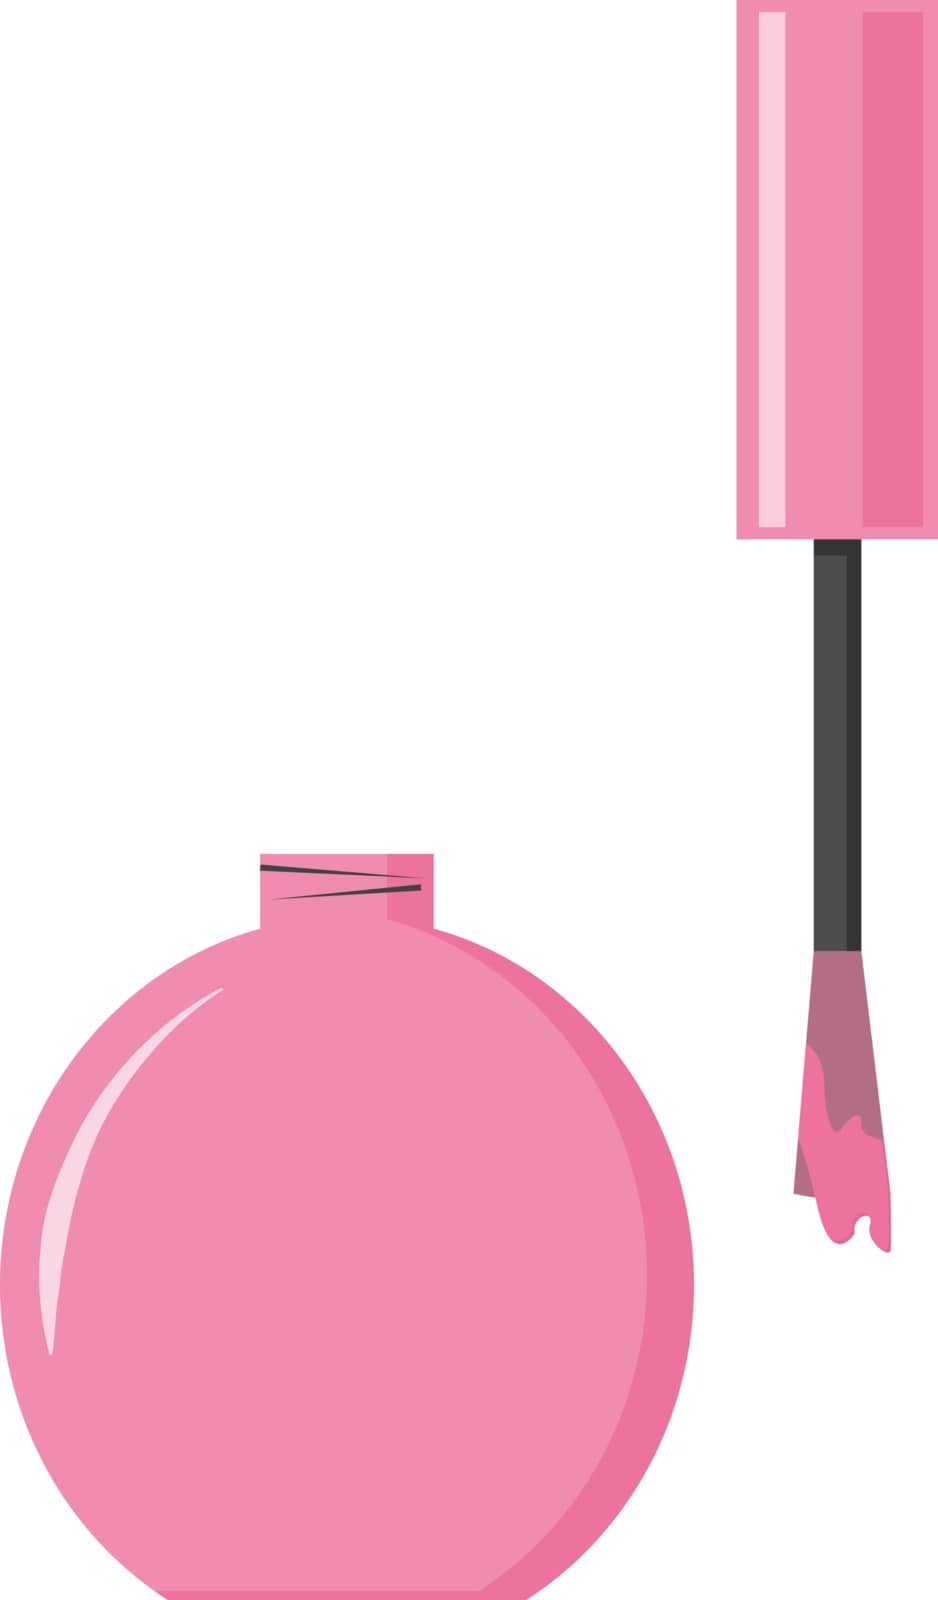 Pink manicure, illustration, vector on white background.